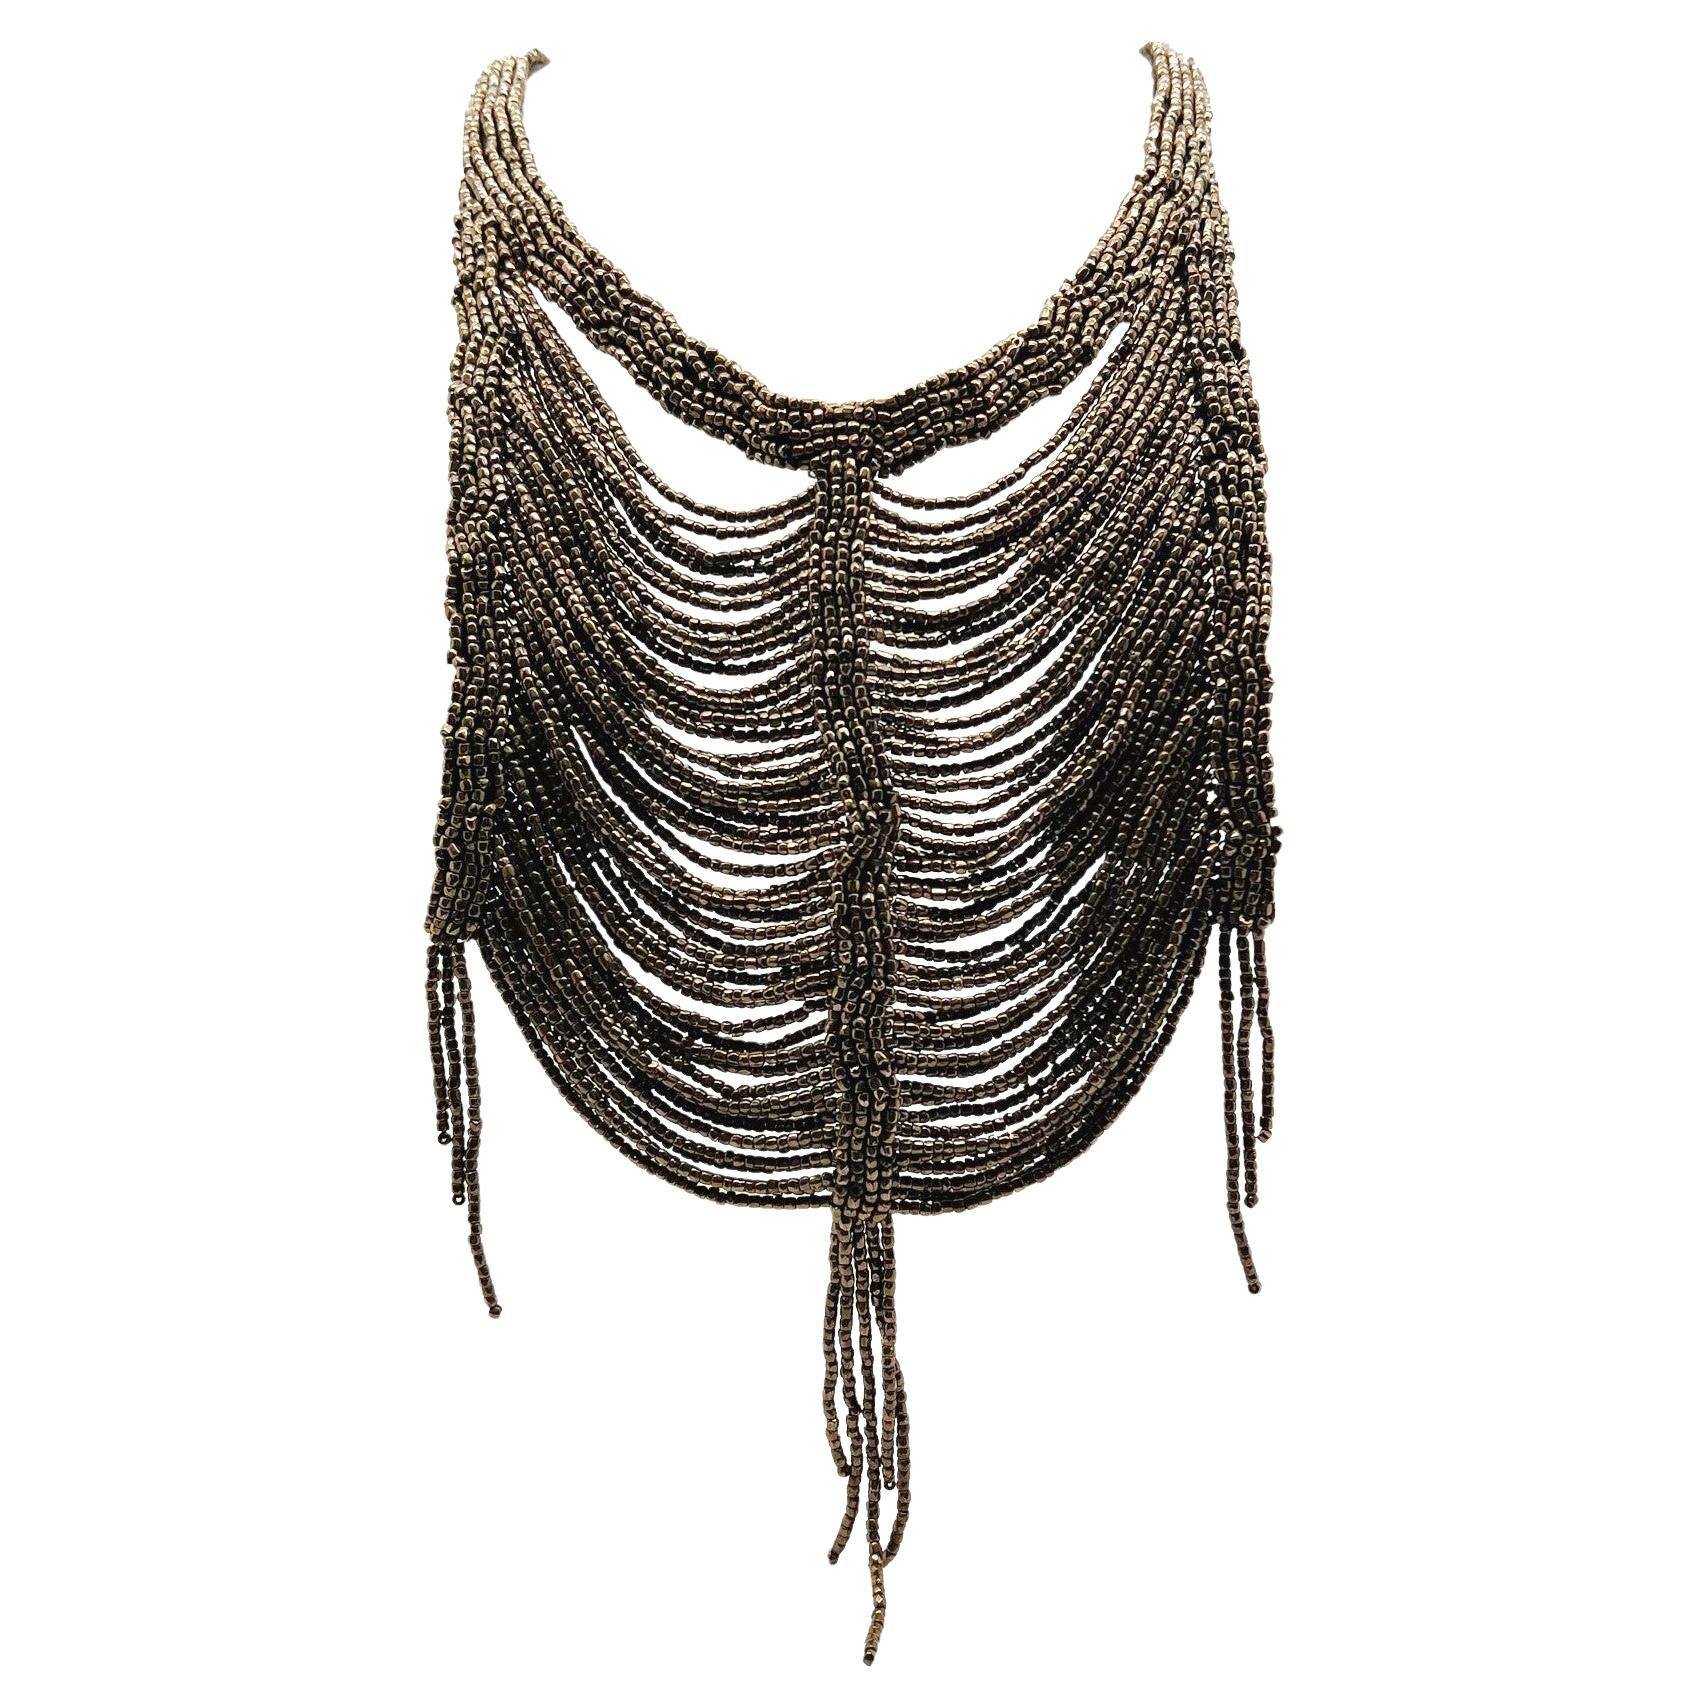 Christian Dior by Galliano Masai Inspired Bronzed Bib Necklace 1990s For Sale